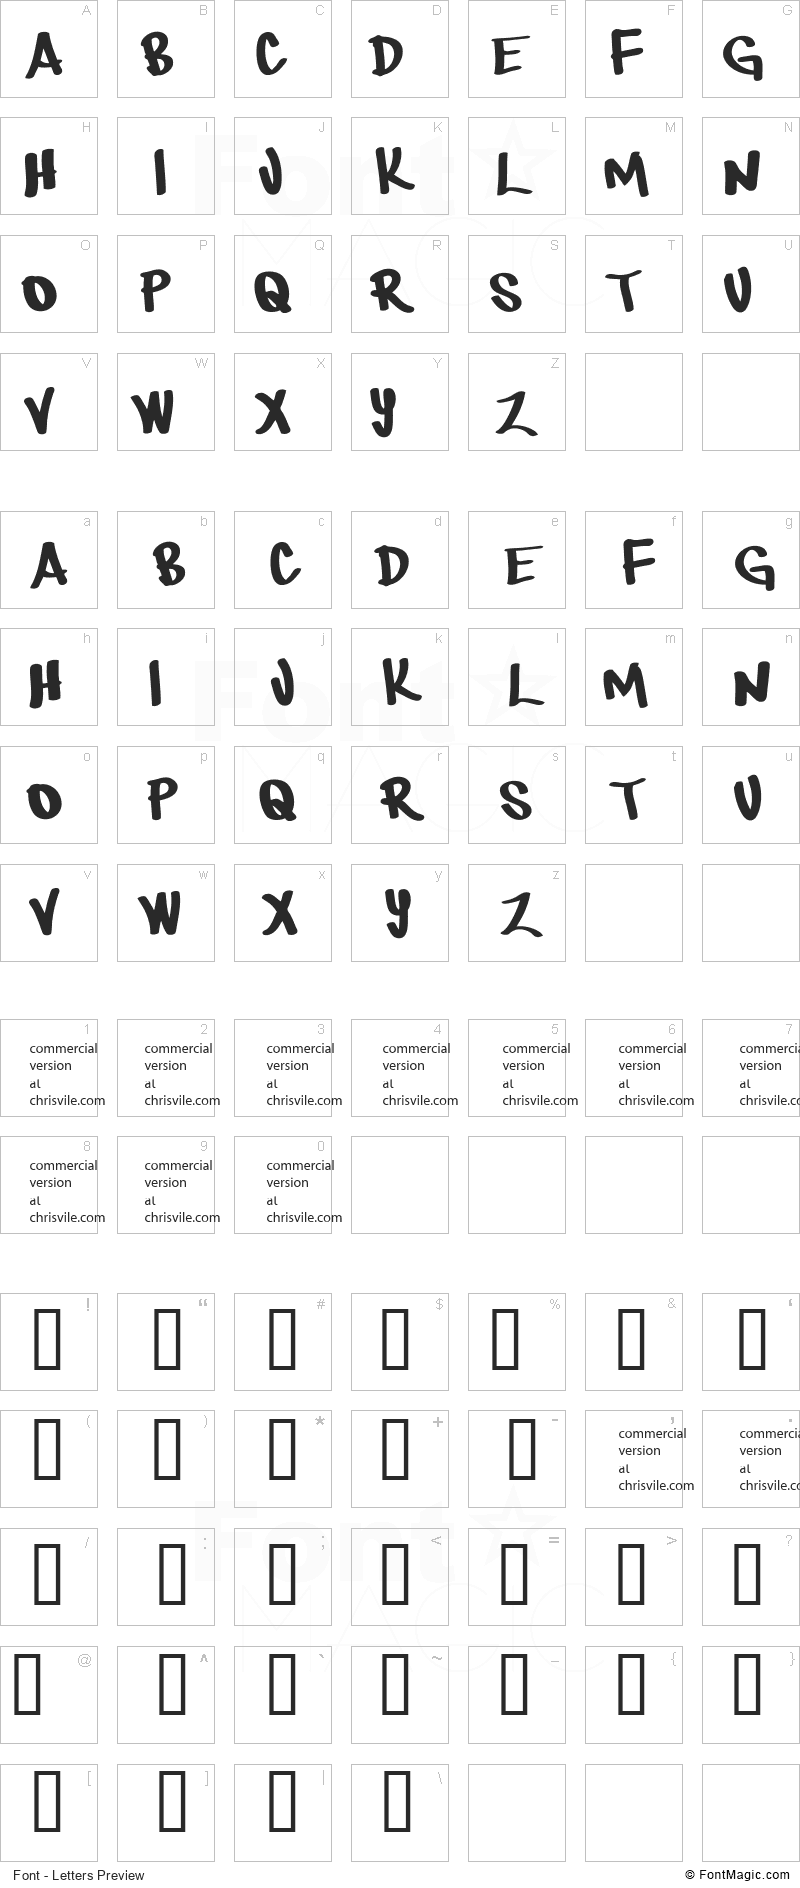 There be monsters Font - All Latters Preview Chart